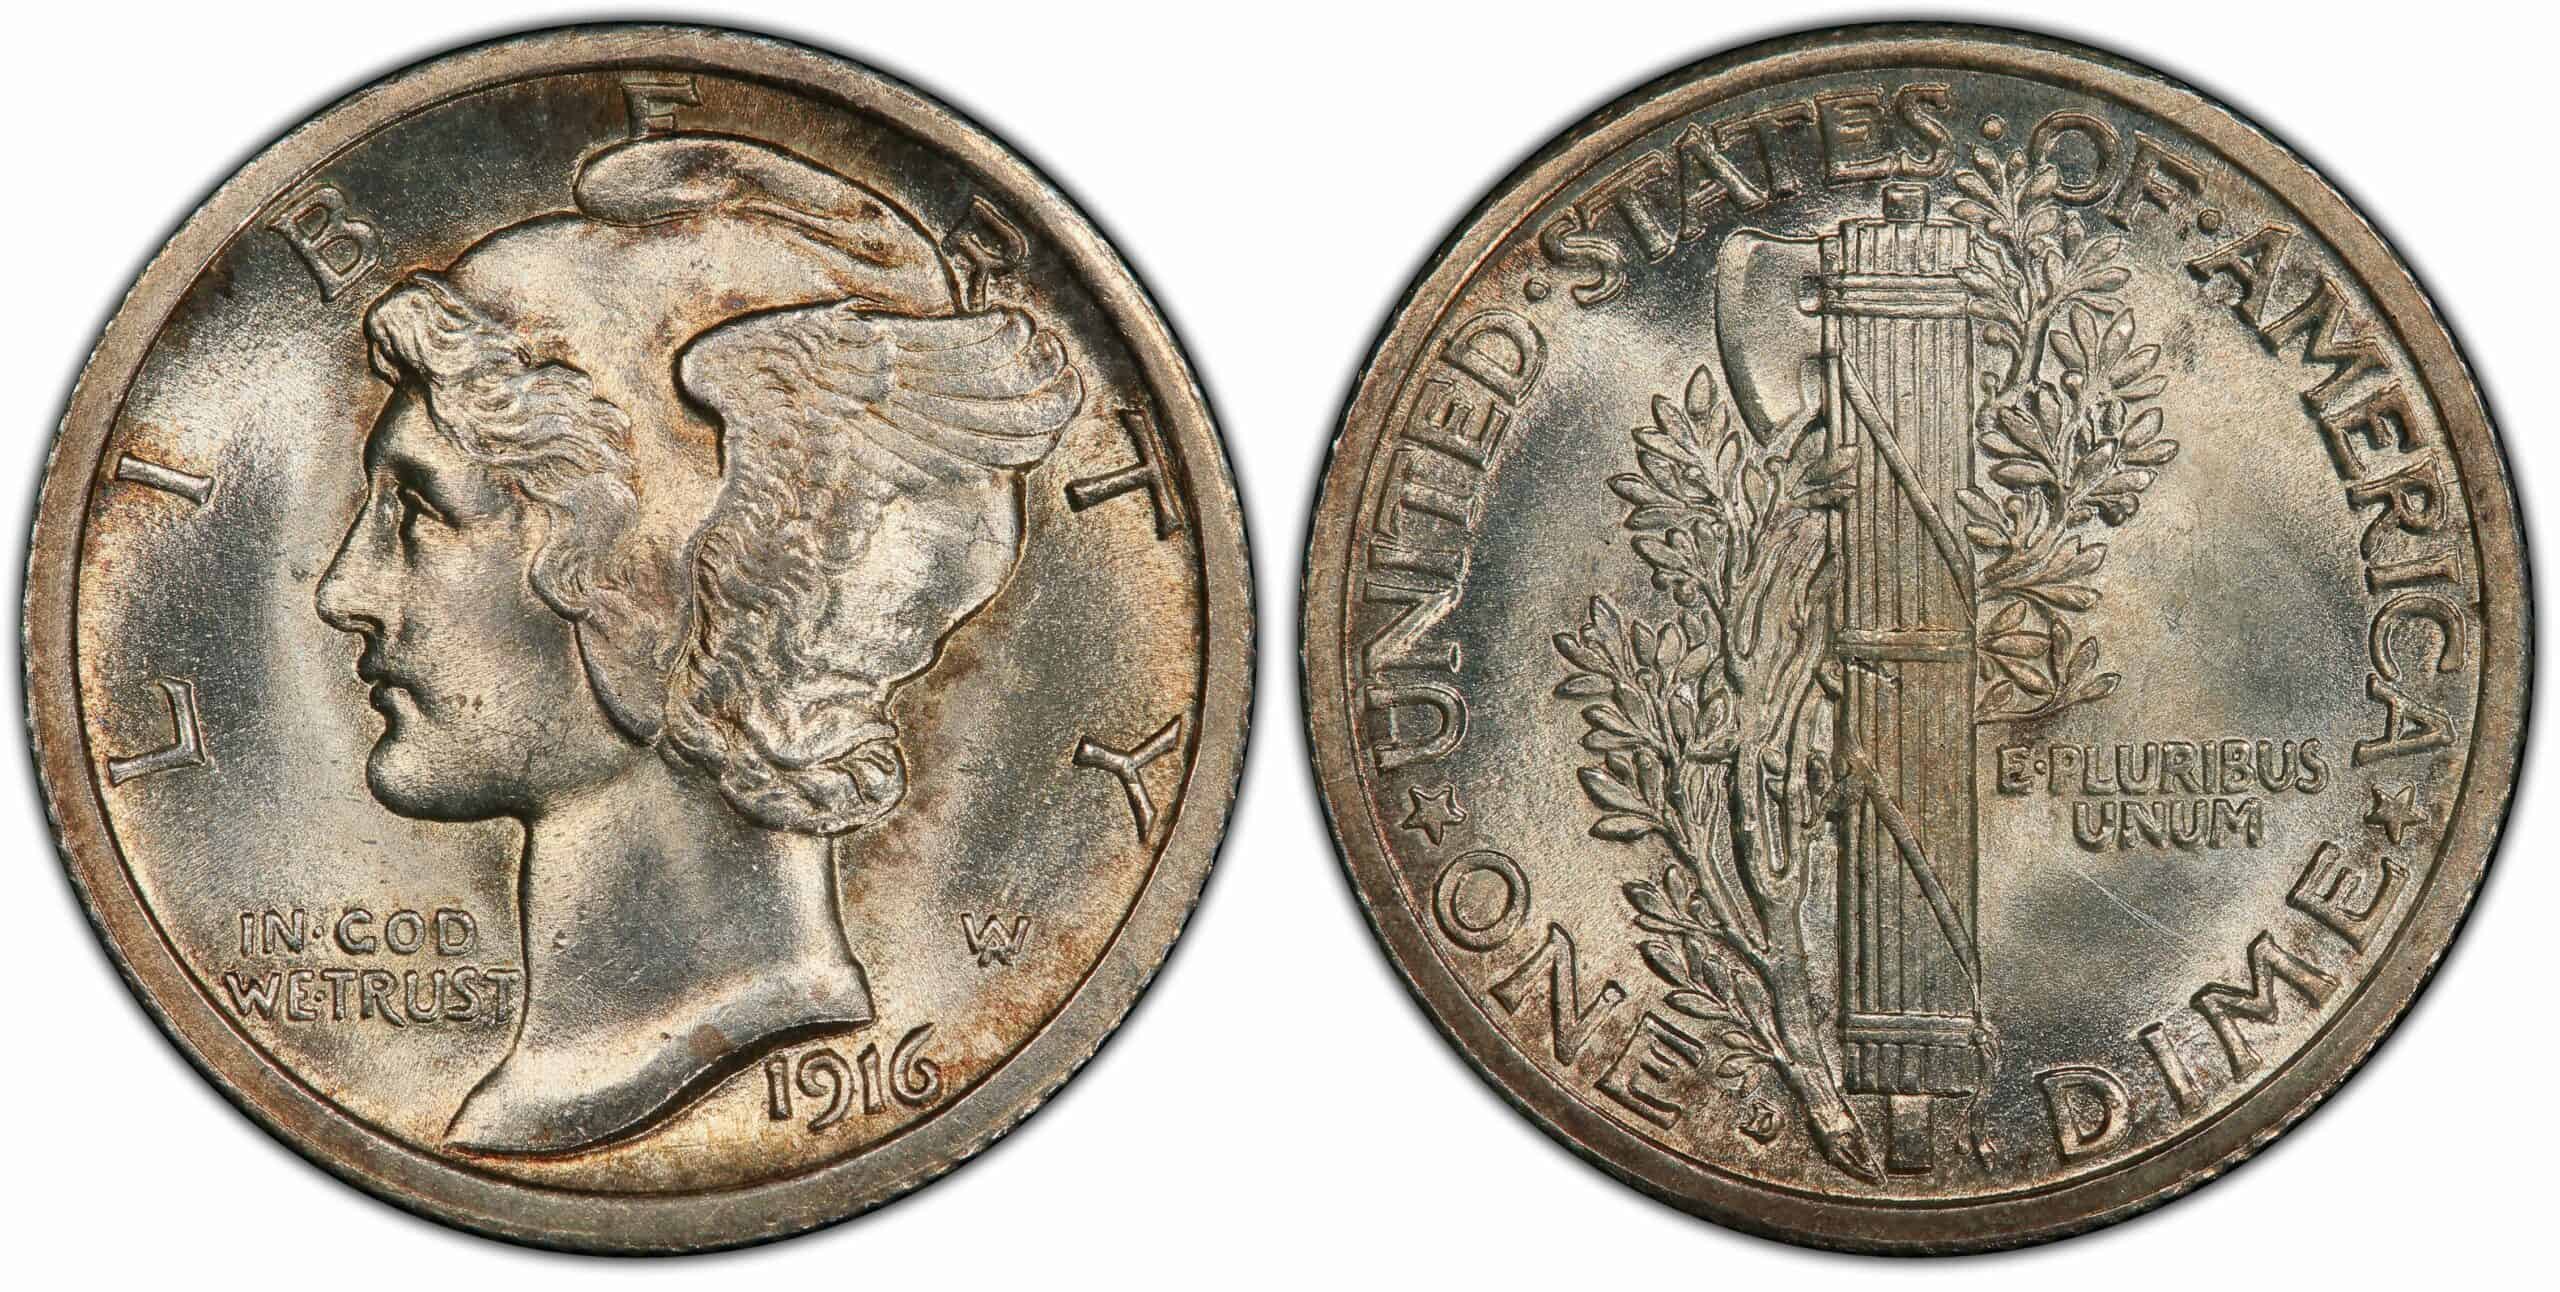 History of The 1916 Dime